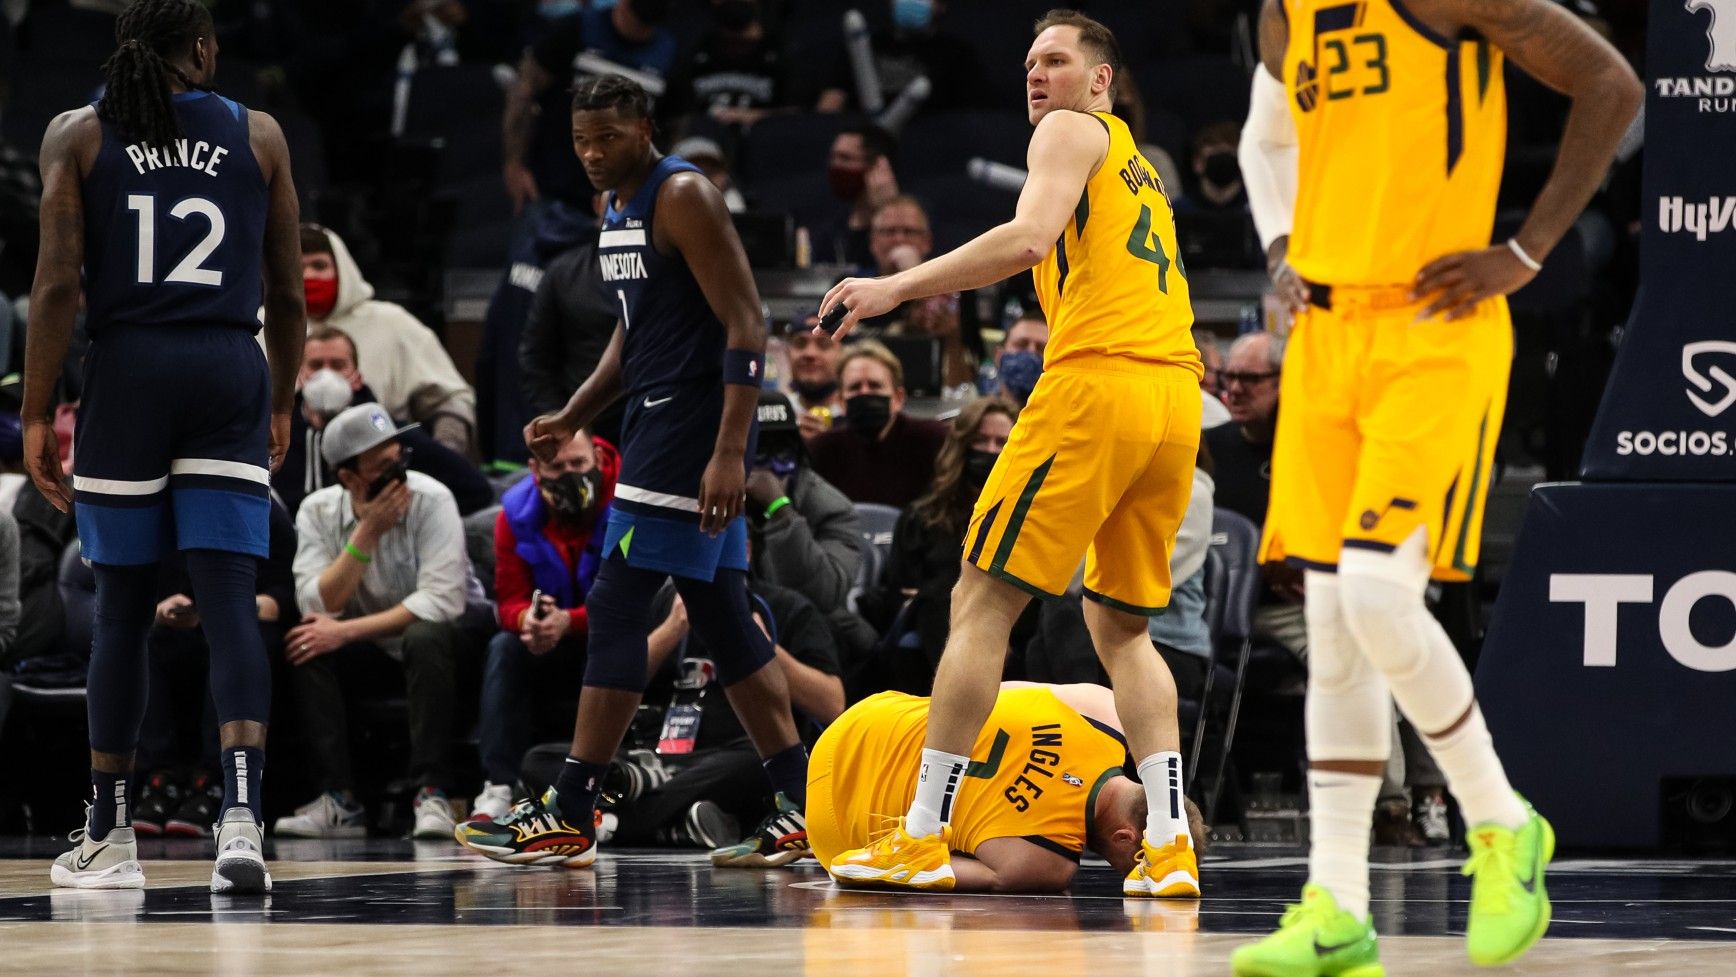 Aussie NBA star Joe Ingles to have MRI on knee after worrying collapse during game